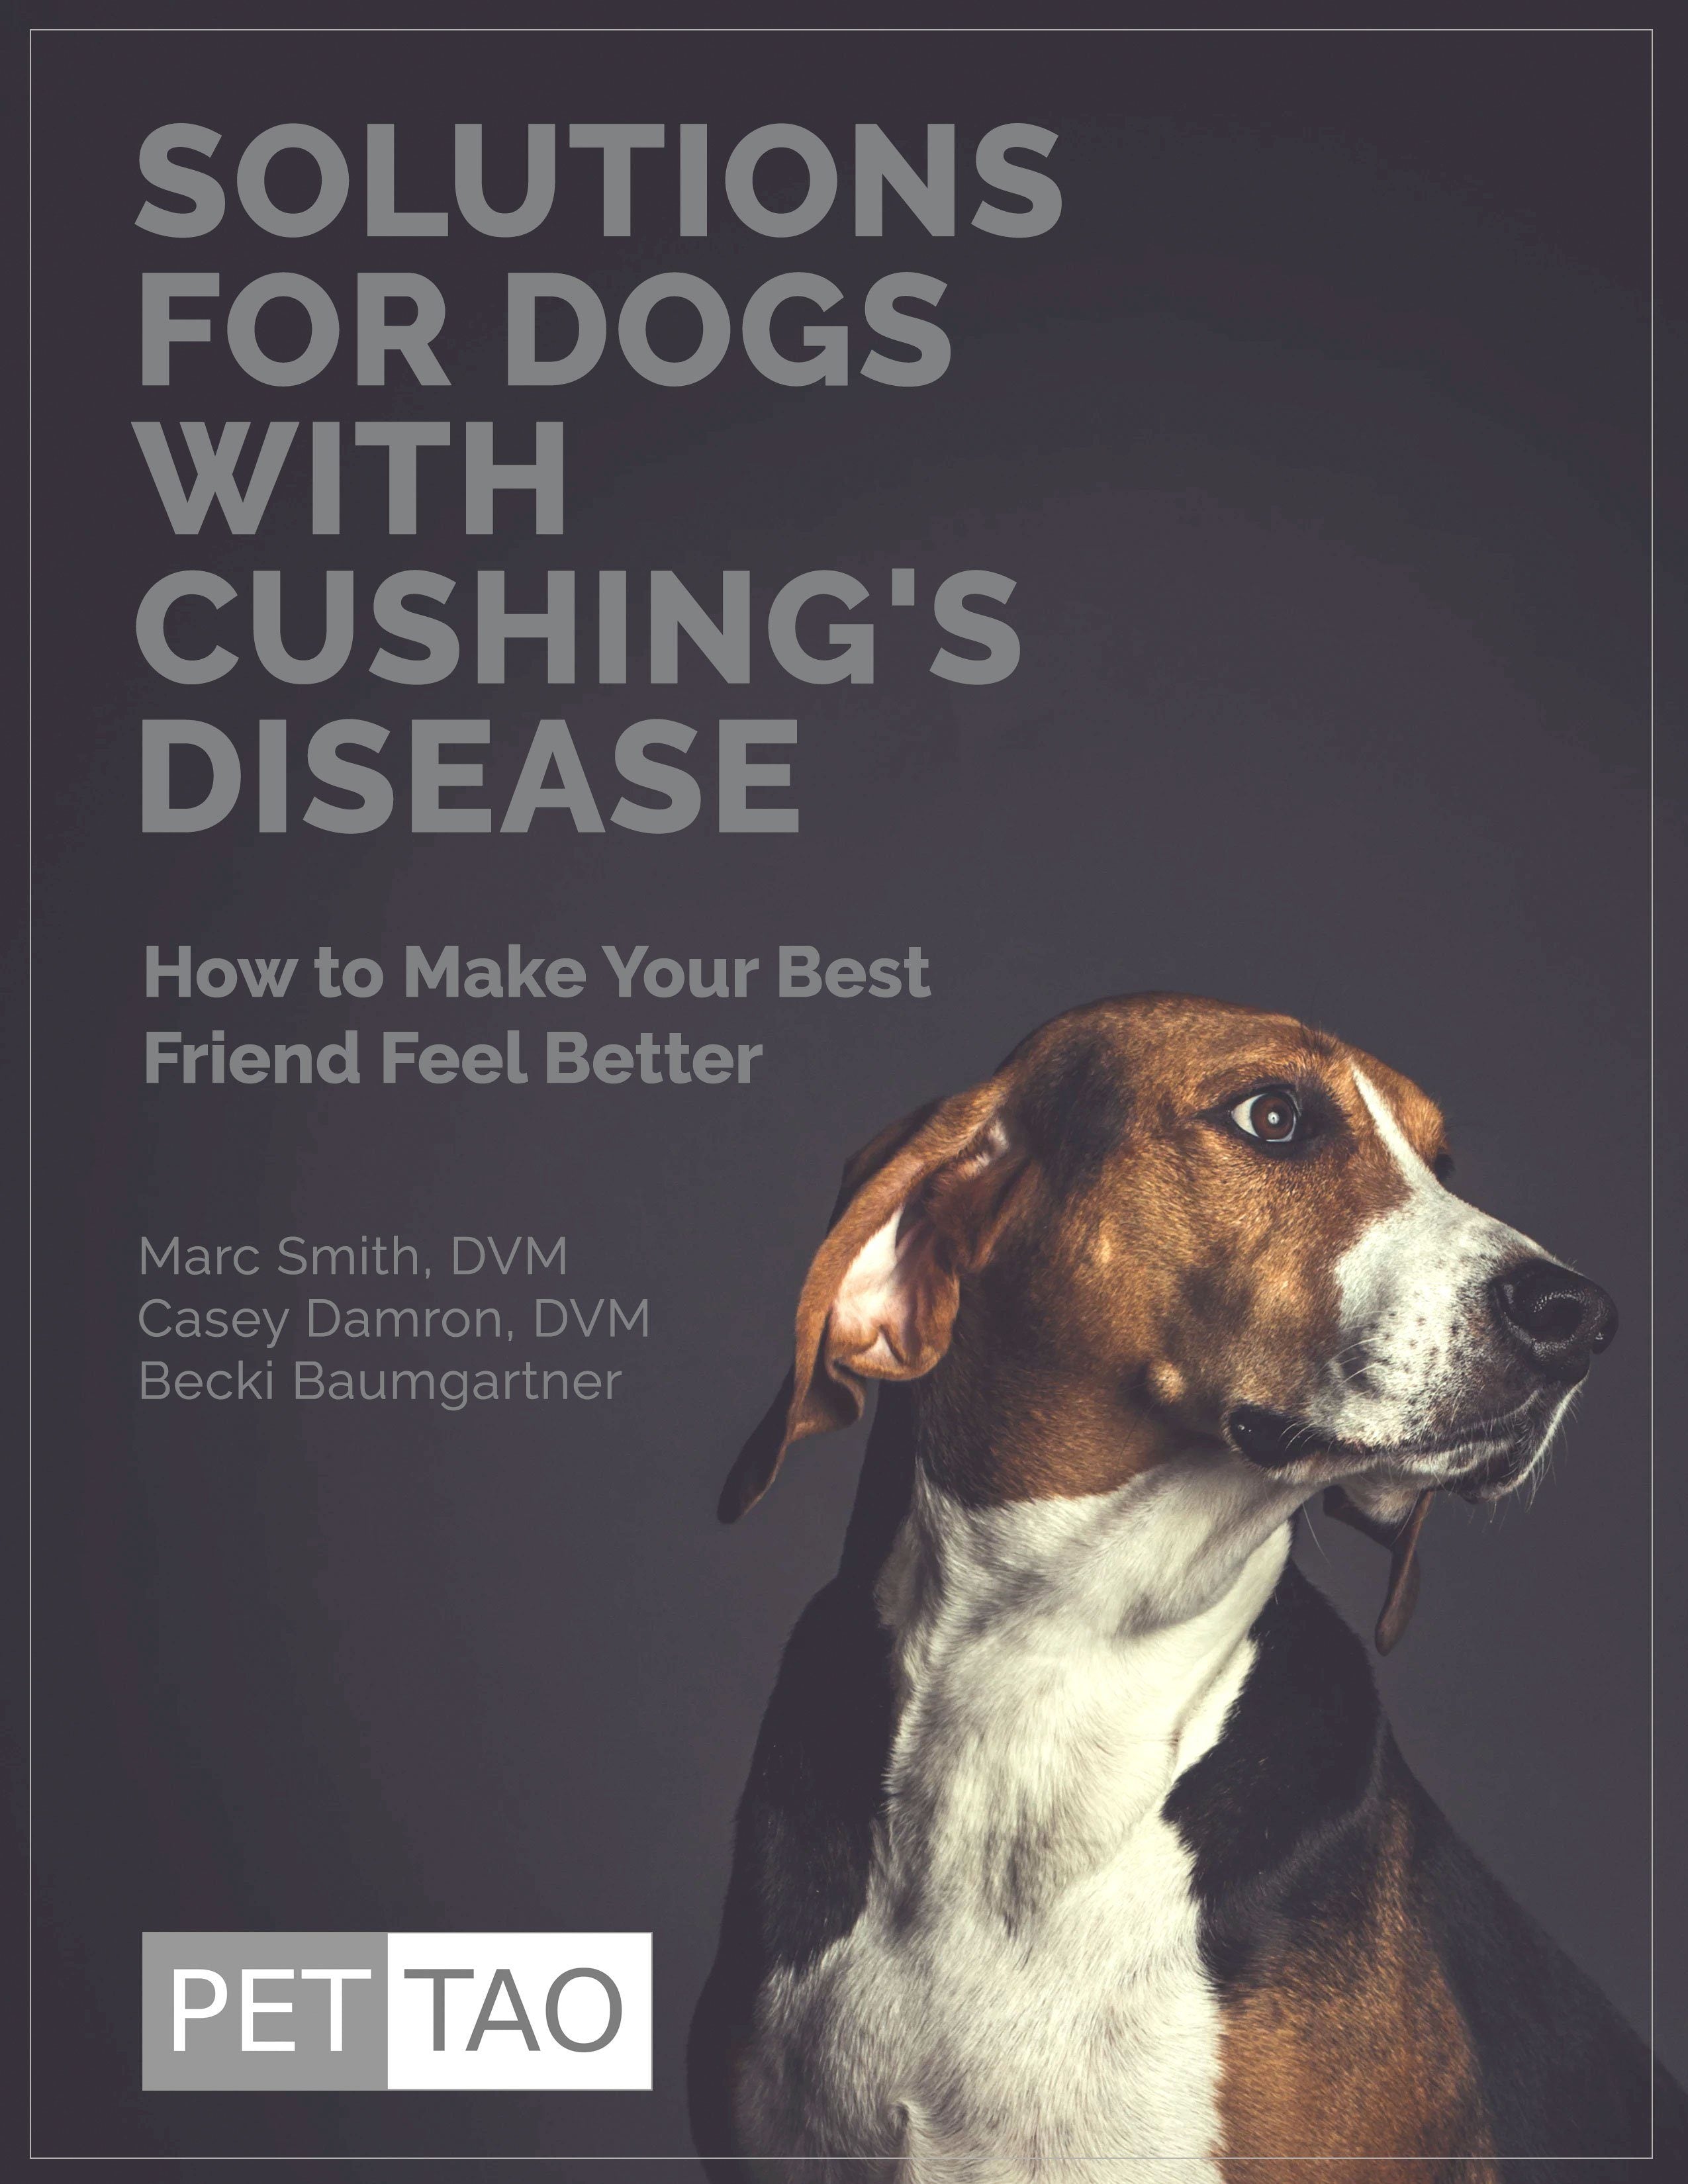 Solutions for Dogs With Cushing's Disease - Instant Ebook Download  - TCVM Pet Supply